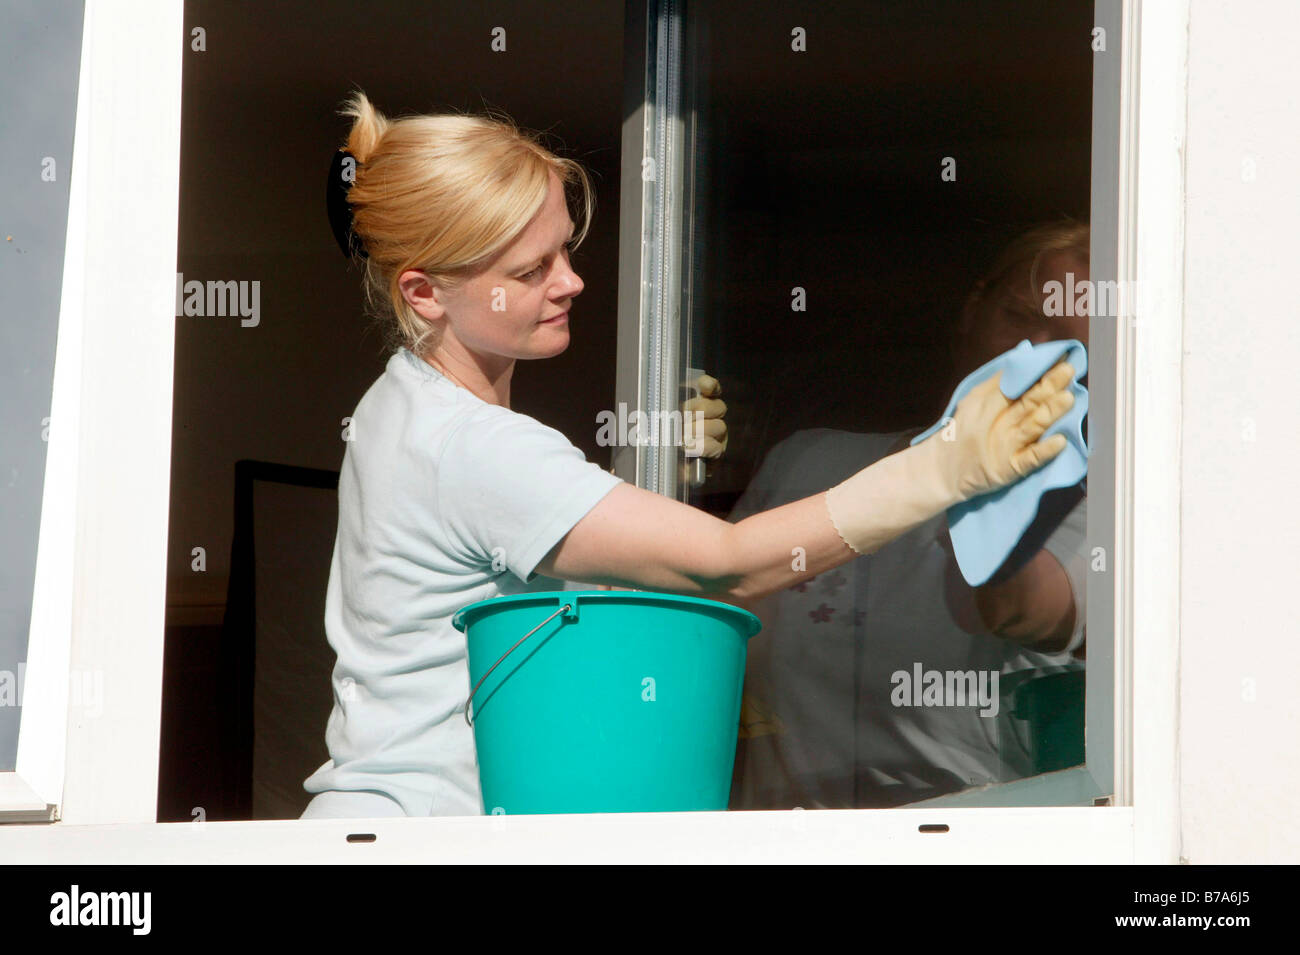 Young woman cleaning windows Stock Photo